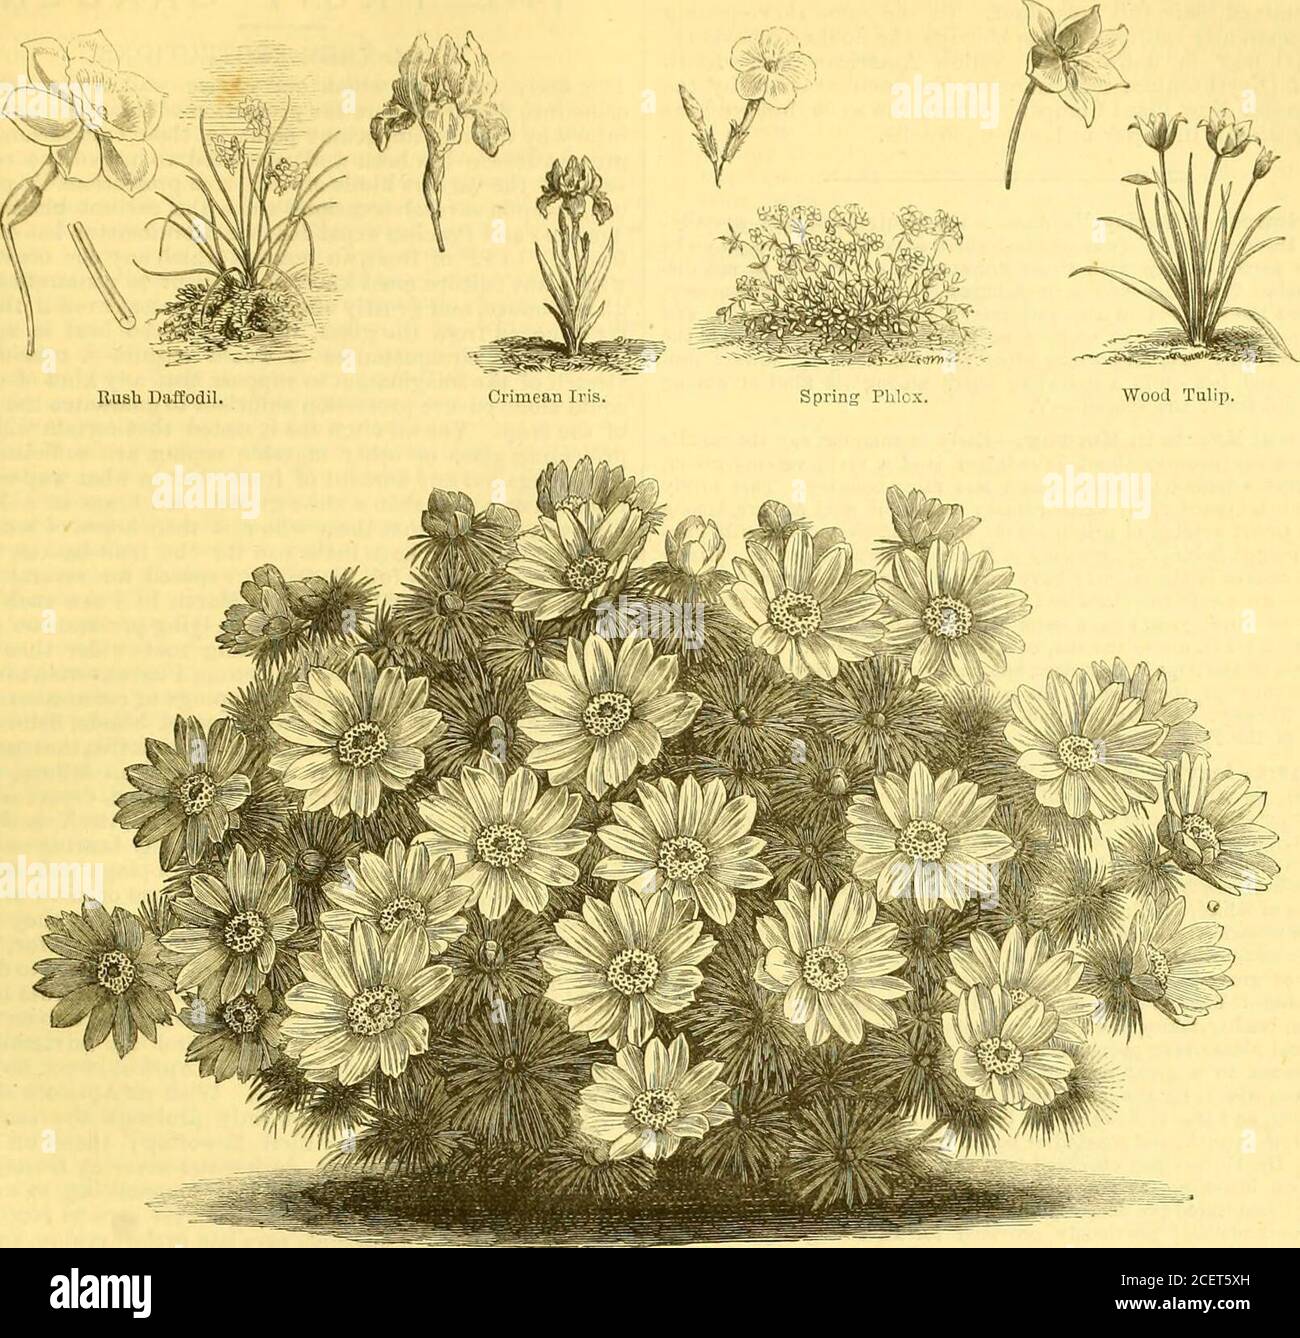 . The Garden : an illustrated weekly journal of gardening in all its branches. ed habit, is beginning to show itsrosy bloom. The fairest among the white flowers of the weekis the White Buttercup (Ranunculus amplexicaulis), andamong the blue the Apennine Anemone (A. apennina), which,like many other flowers, is much later than usual. The blueGromwell (Lithospermum prostratum) begins to show itsGentian-blue blossoms, and the spring Orobus, some time open,is gradually showing more blossoms on its giaceful tuft.f.Dentaria digitata is in full bloom, a slender plant witli astock-like bloom admirably Stock Photo